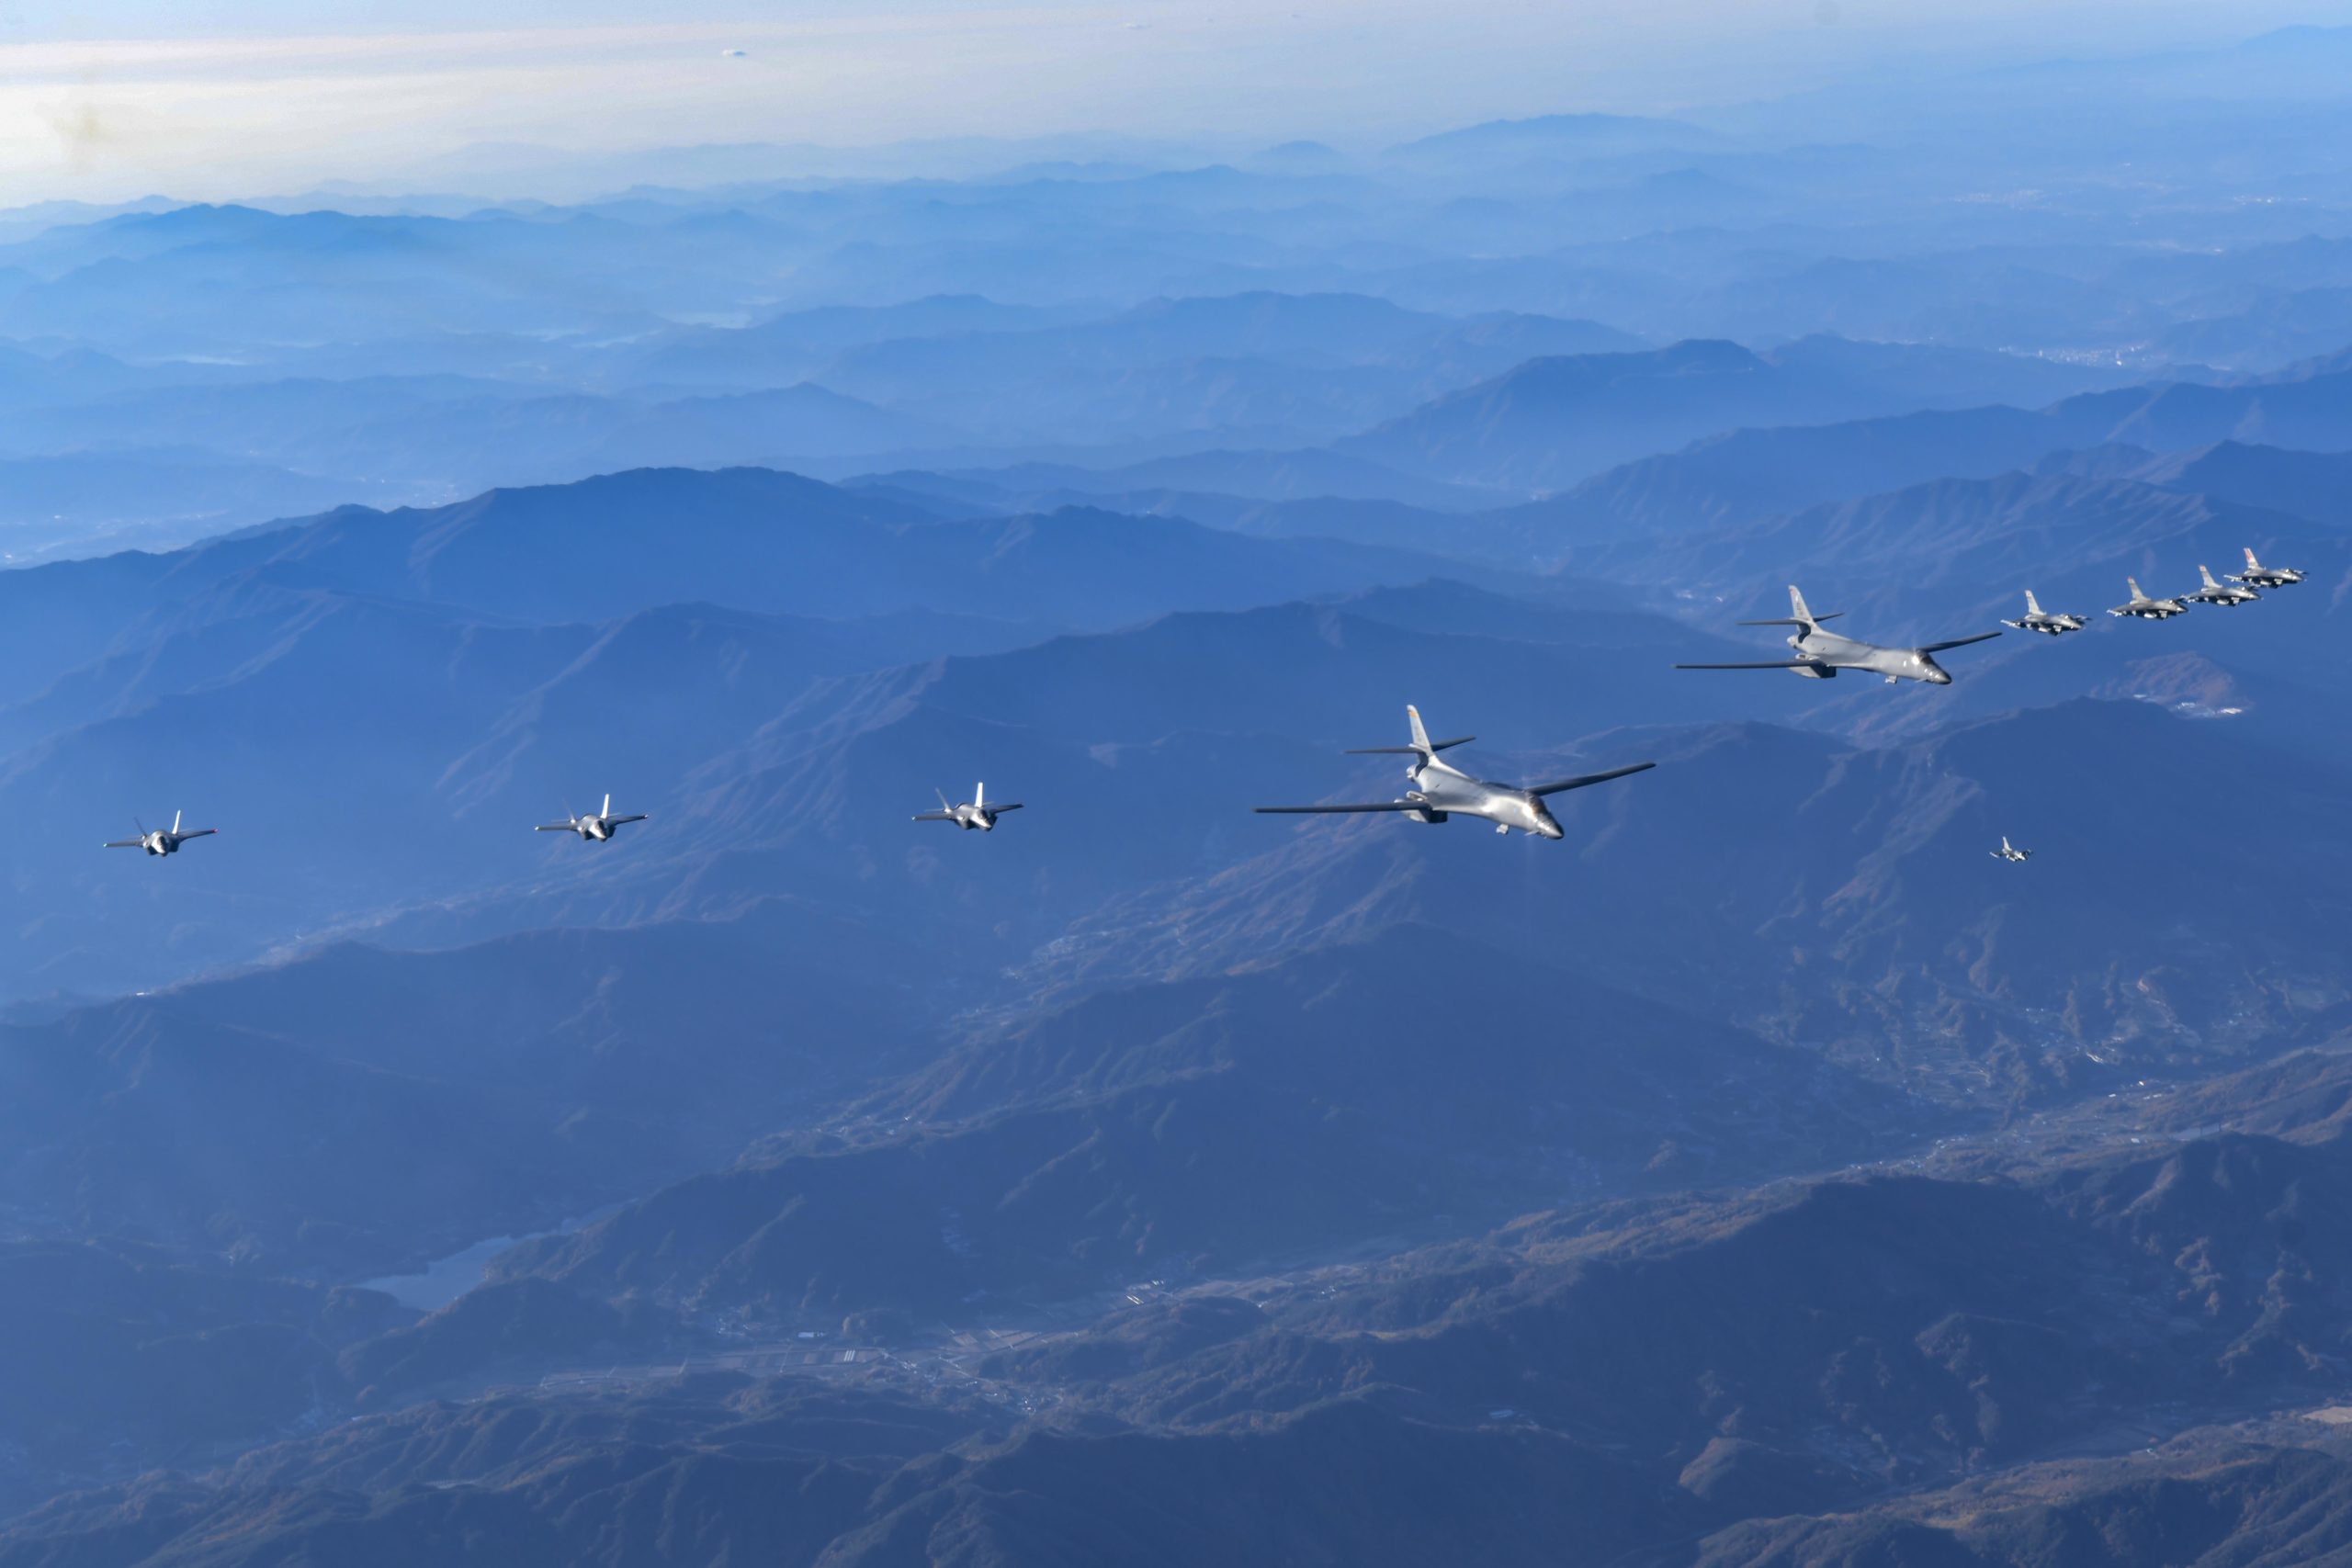 UNDISCLOSED LOCATION, SOUTH KOREA - NOVEMBER 05: In this handout image released by the South Korean Defense Ministry, two U.S. B-1B Lancer strategic bombers, four South Korean Air Force F-35 fighter jets and four U.S. Air Force F-16 fighter jets fly over South Korea during the "Vigilant Storm" joint air drill on November 05, 2022 at an undisclosed location in South Korea. After flying from Guam, the planes made a sortie over the peninsula as part of the extended "Vigilant Storm" practice. North Korea fired four short-range ballistic missiles (SRBM) toward the Yellow Sea on Saturday, the South Korean military said. The North's latest provocation came on the last day of the extended large-scale combined air drills by the South and the United States.